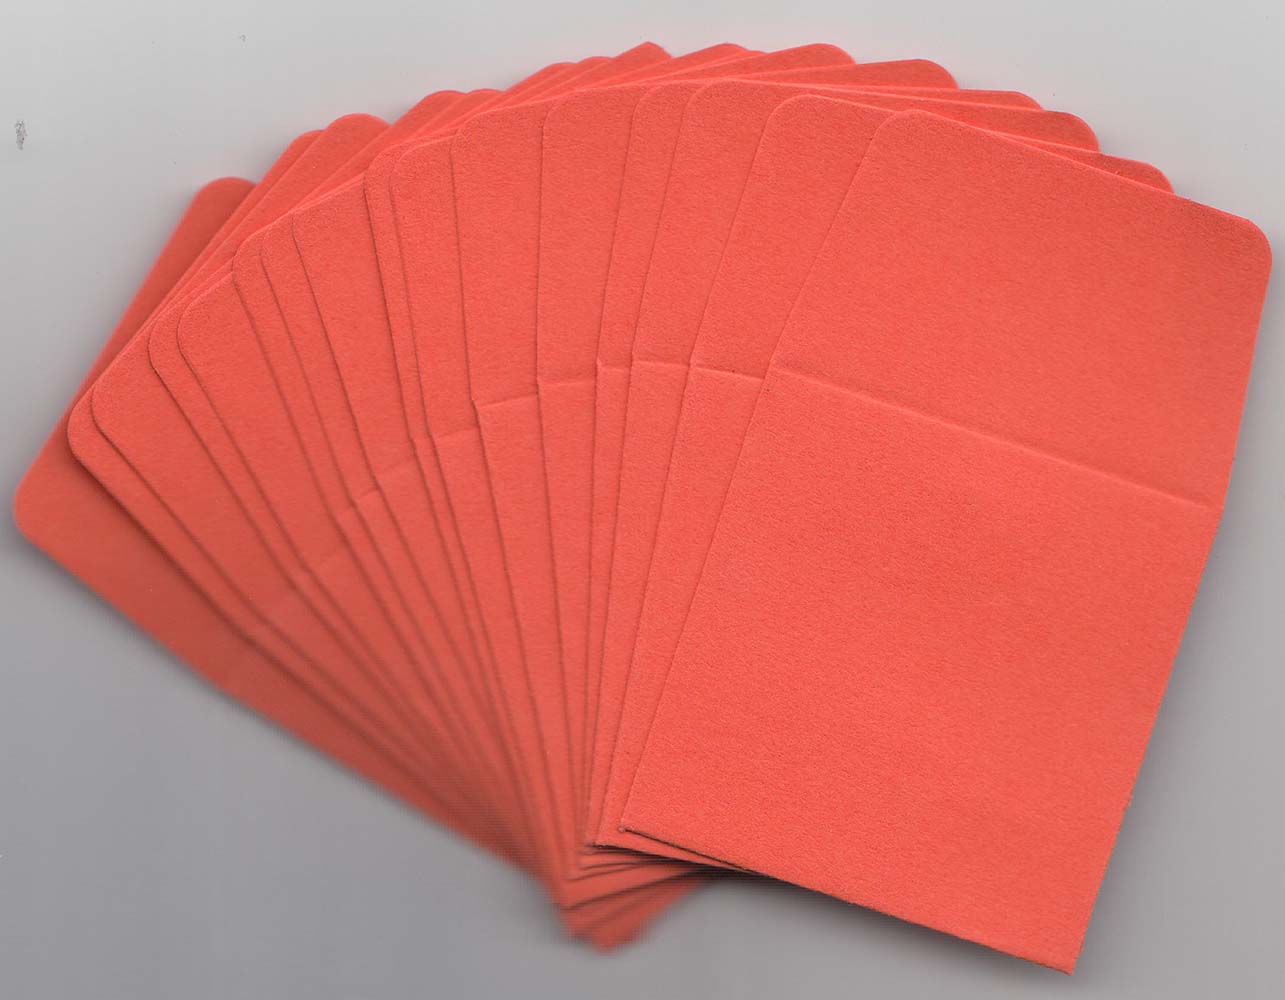 Guardhouse 2 x 2 Paper Coin Envelopes Pack of 500 (Kraft)